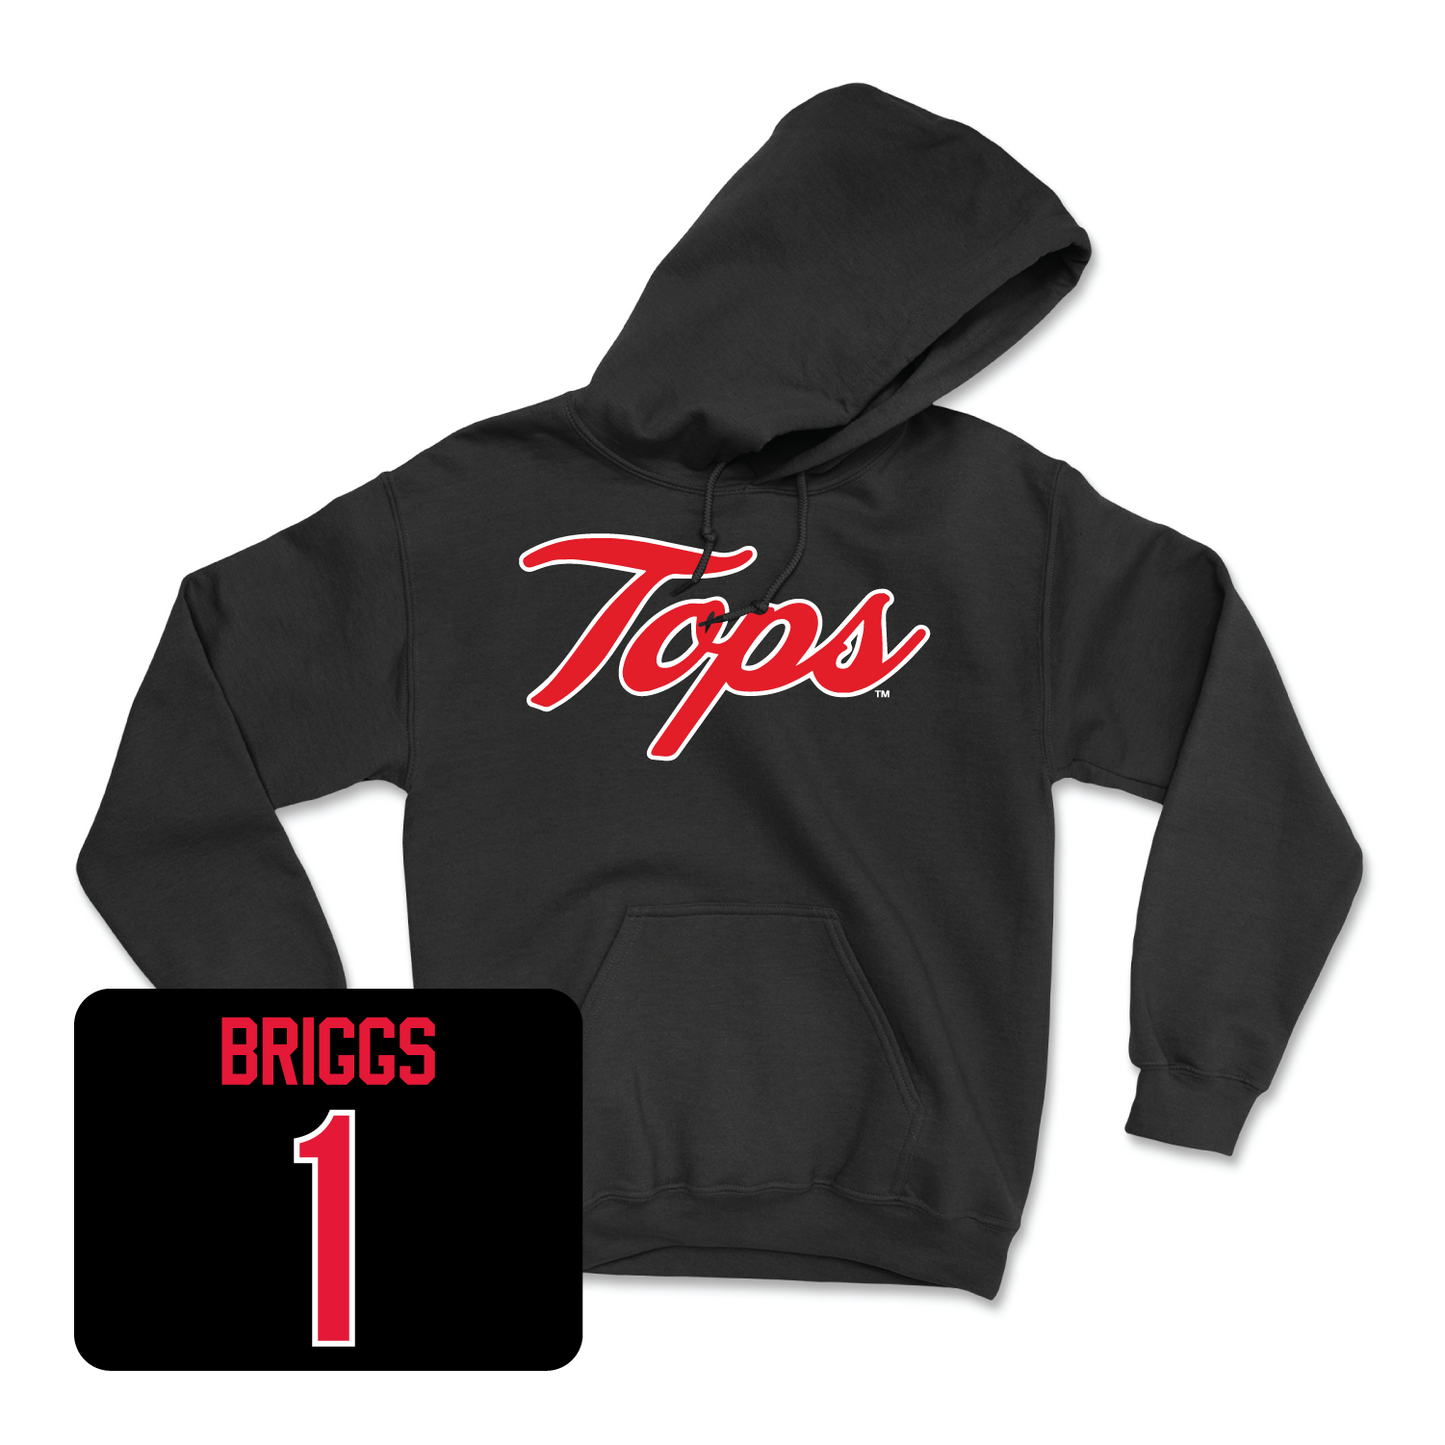 Black Women's Volleyball Tops Hoodie 4X-Large / Paige Briggs | #1